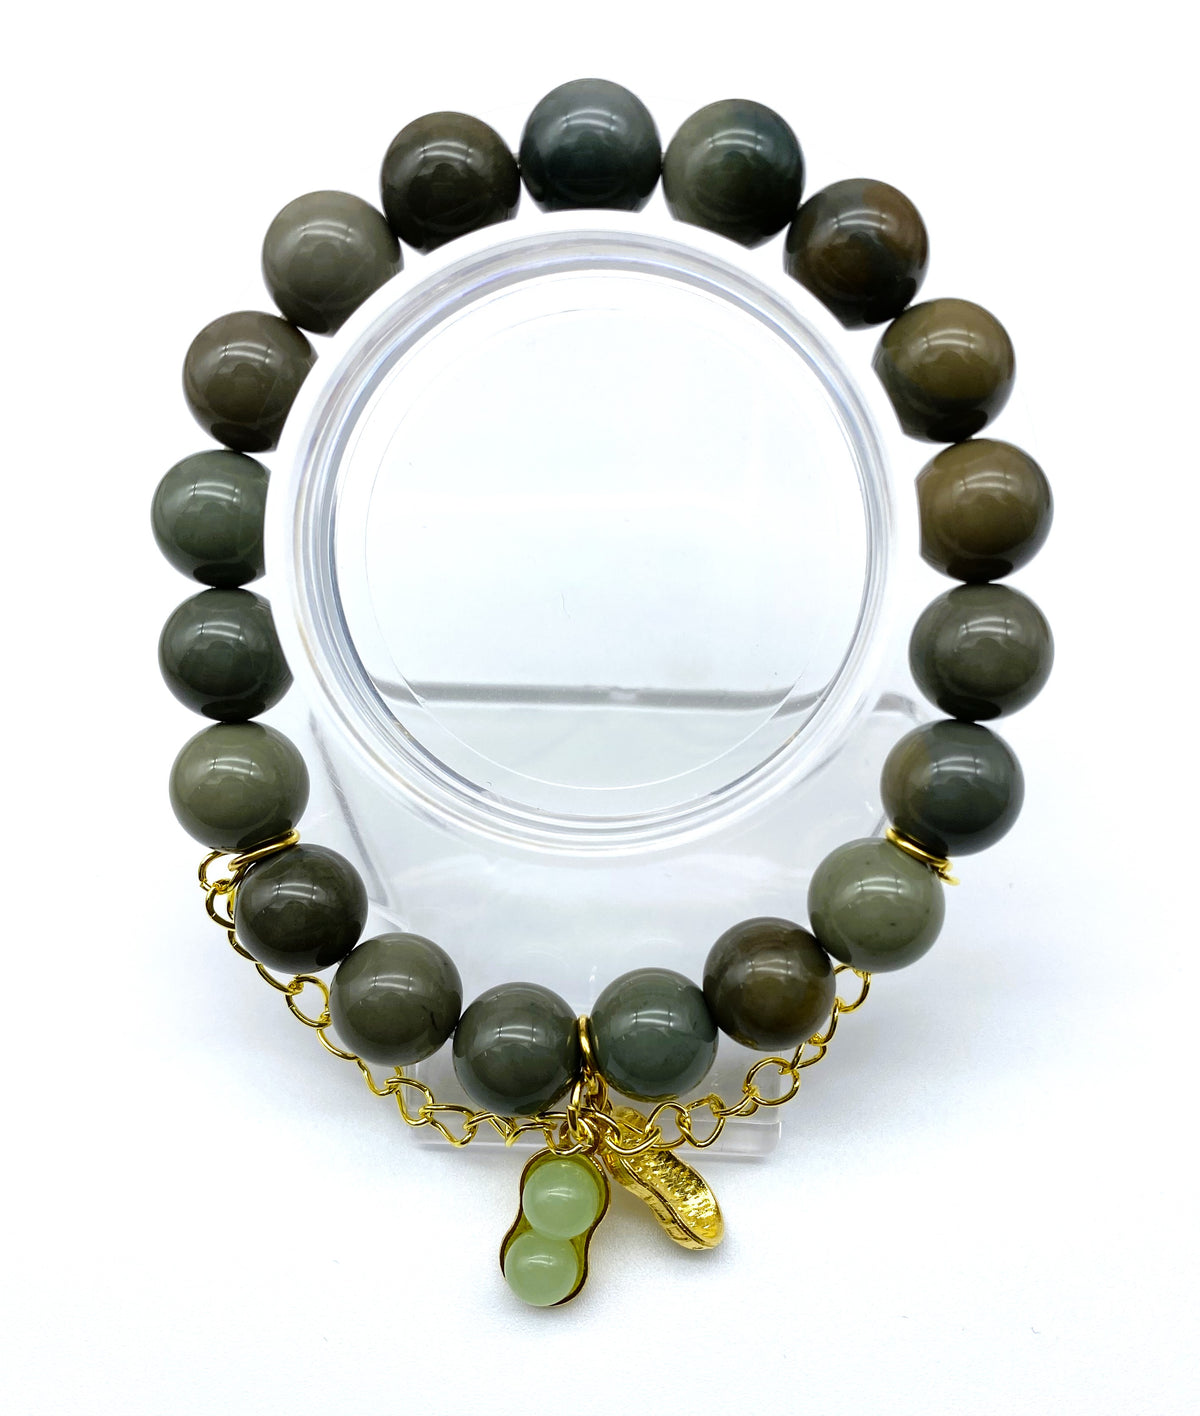 10mm 11mm Gorgeous Design Alashan Agate Bracelet Natural Stretch 7.5inches Healing Crystal